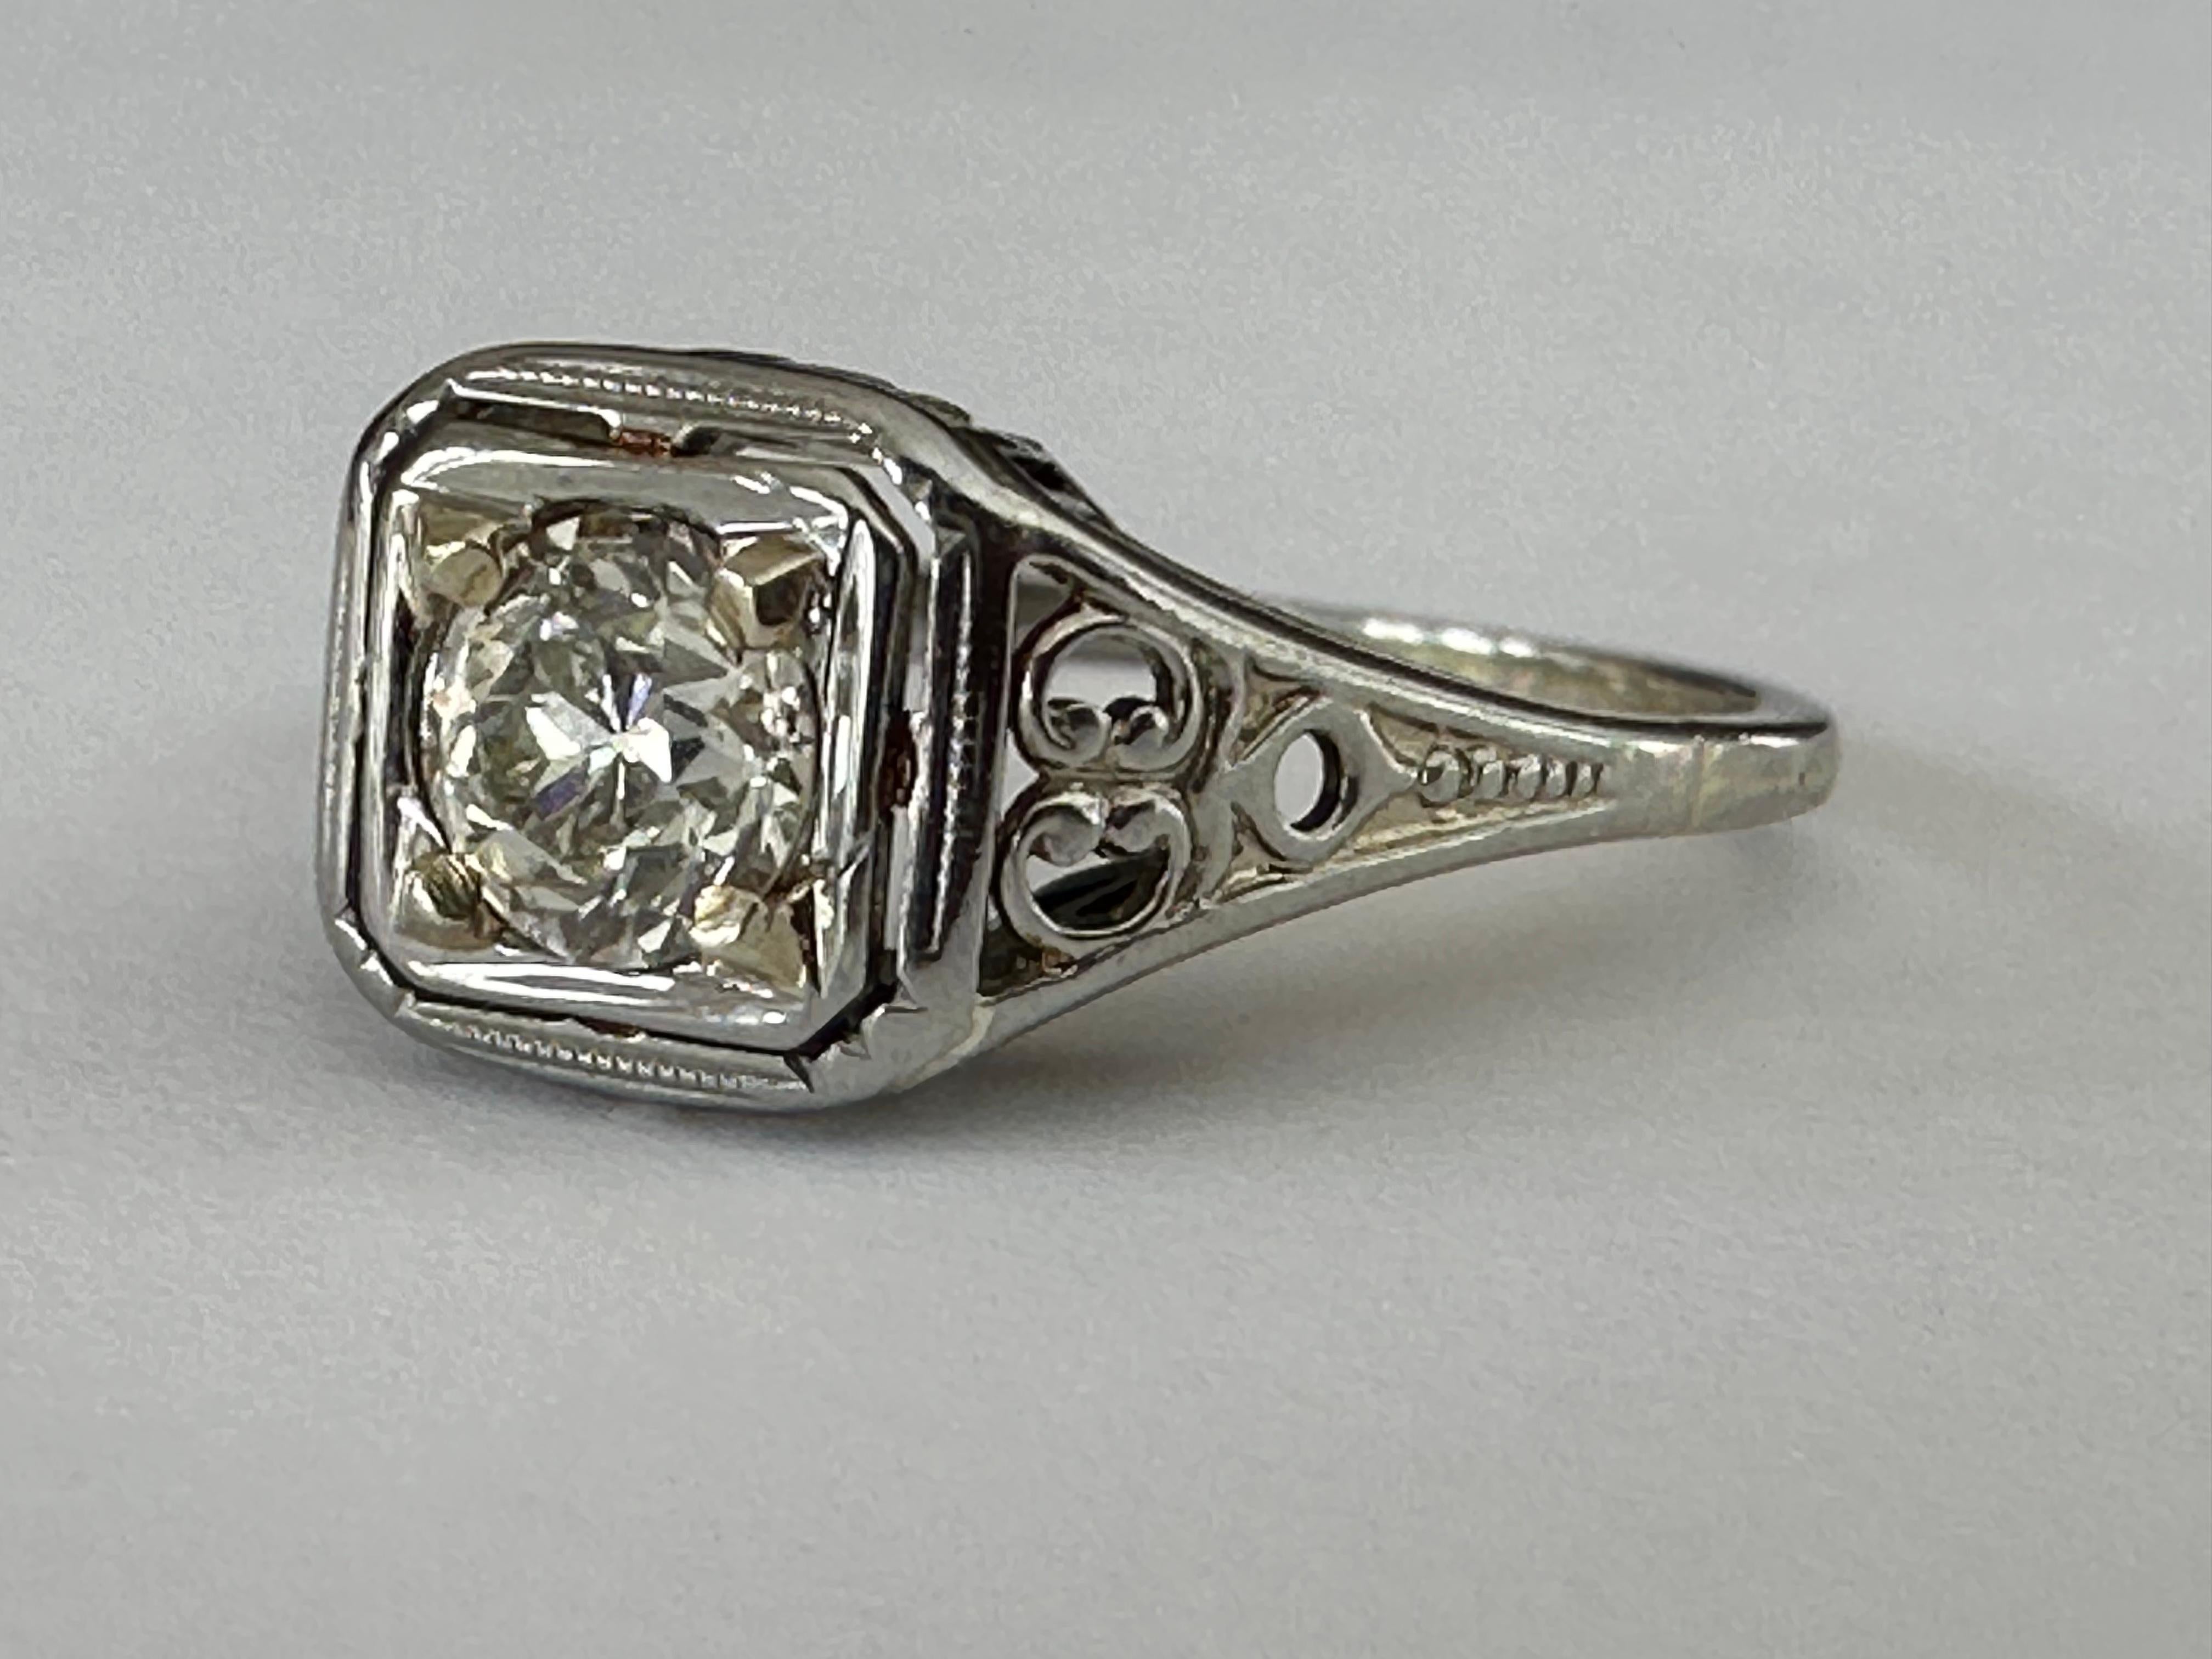 This stunning solitaire ring crafted in 18kt white gold from Belais Manufacturing Co in New York City, one of the first manufacturers of white gold in the United States, is designed around an Old European cut diamond center stone measuring